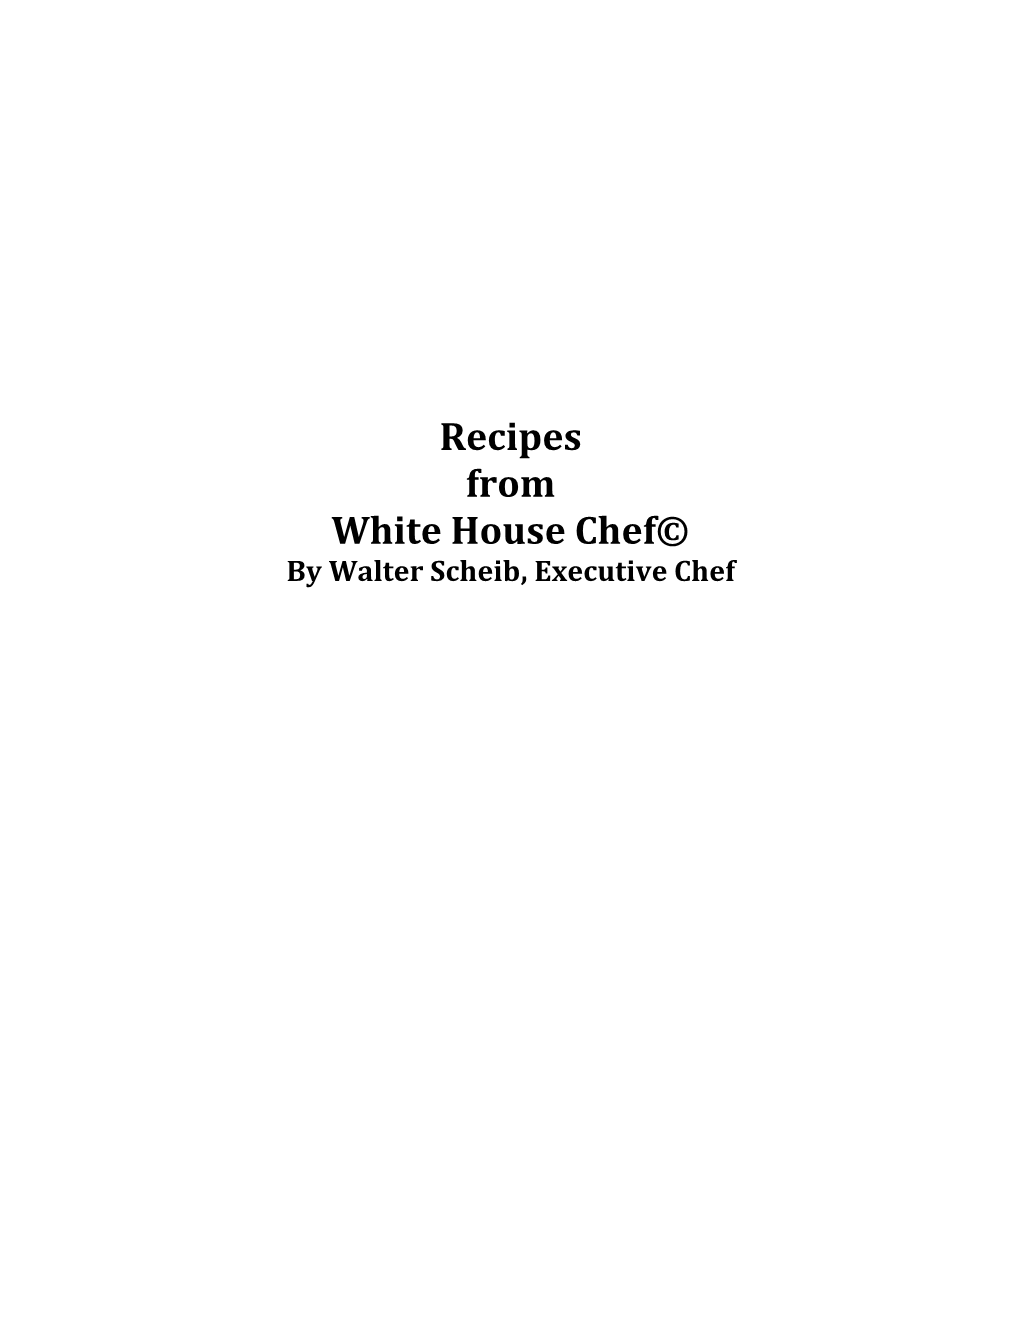 Recipes from White House Chef© by Walter Scheib, Executive Chef